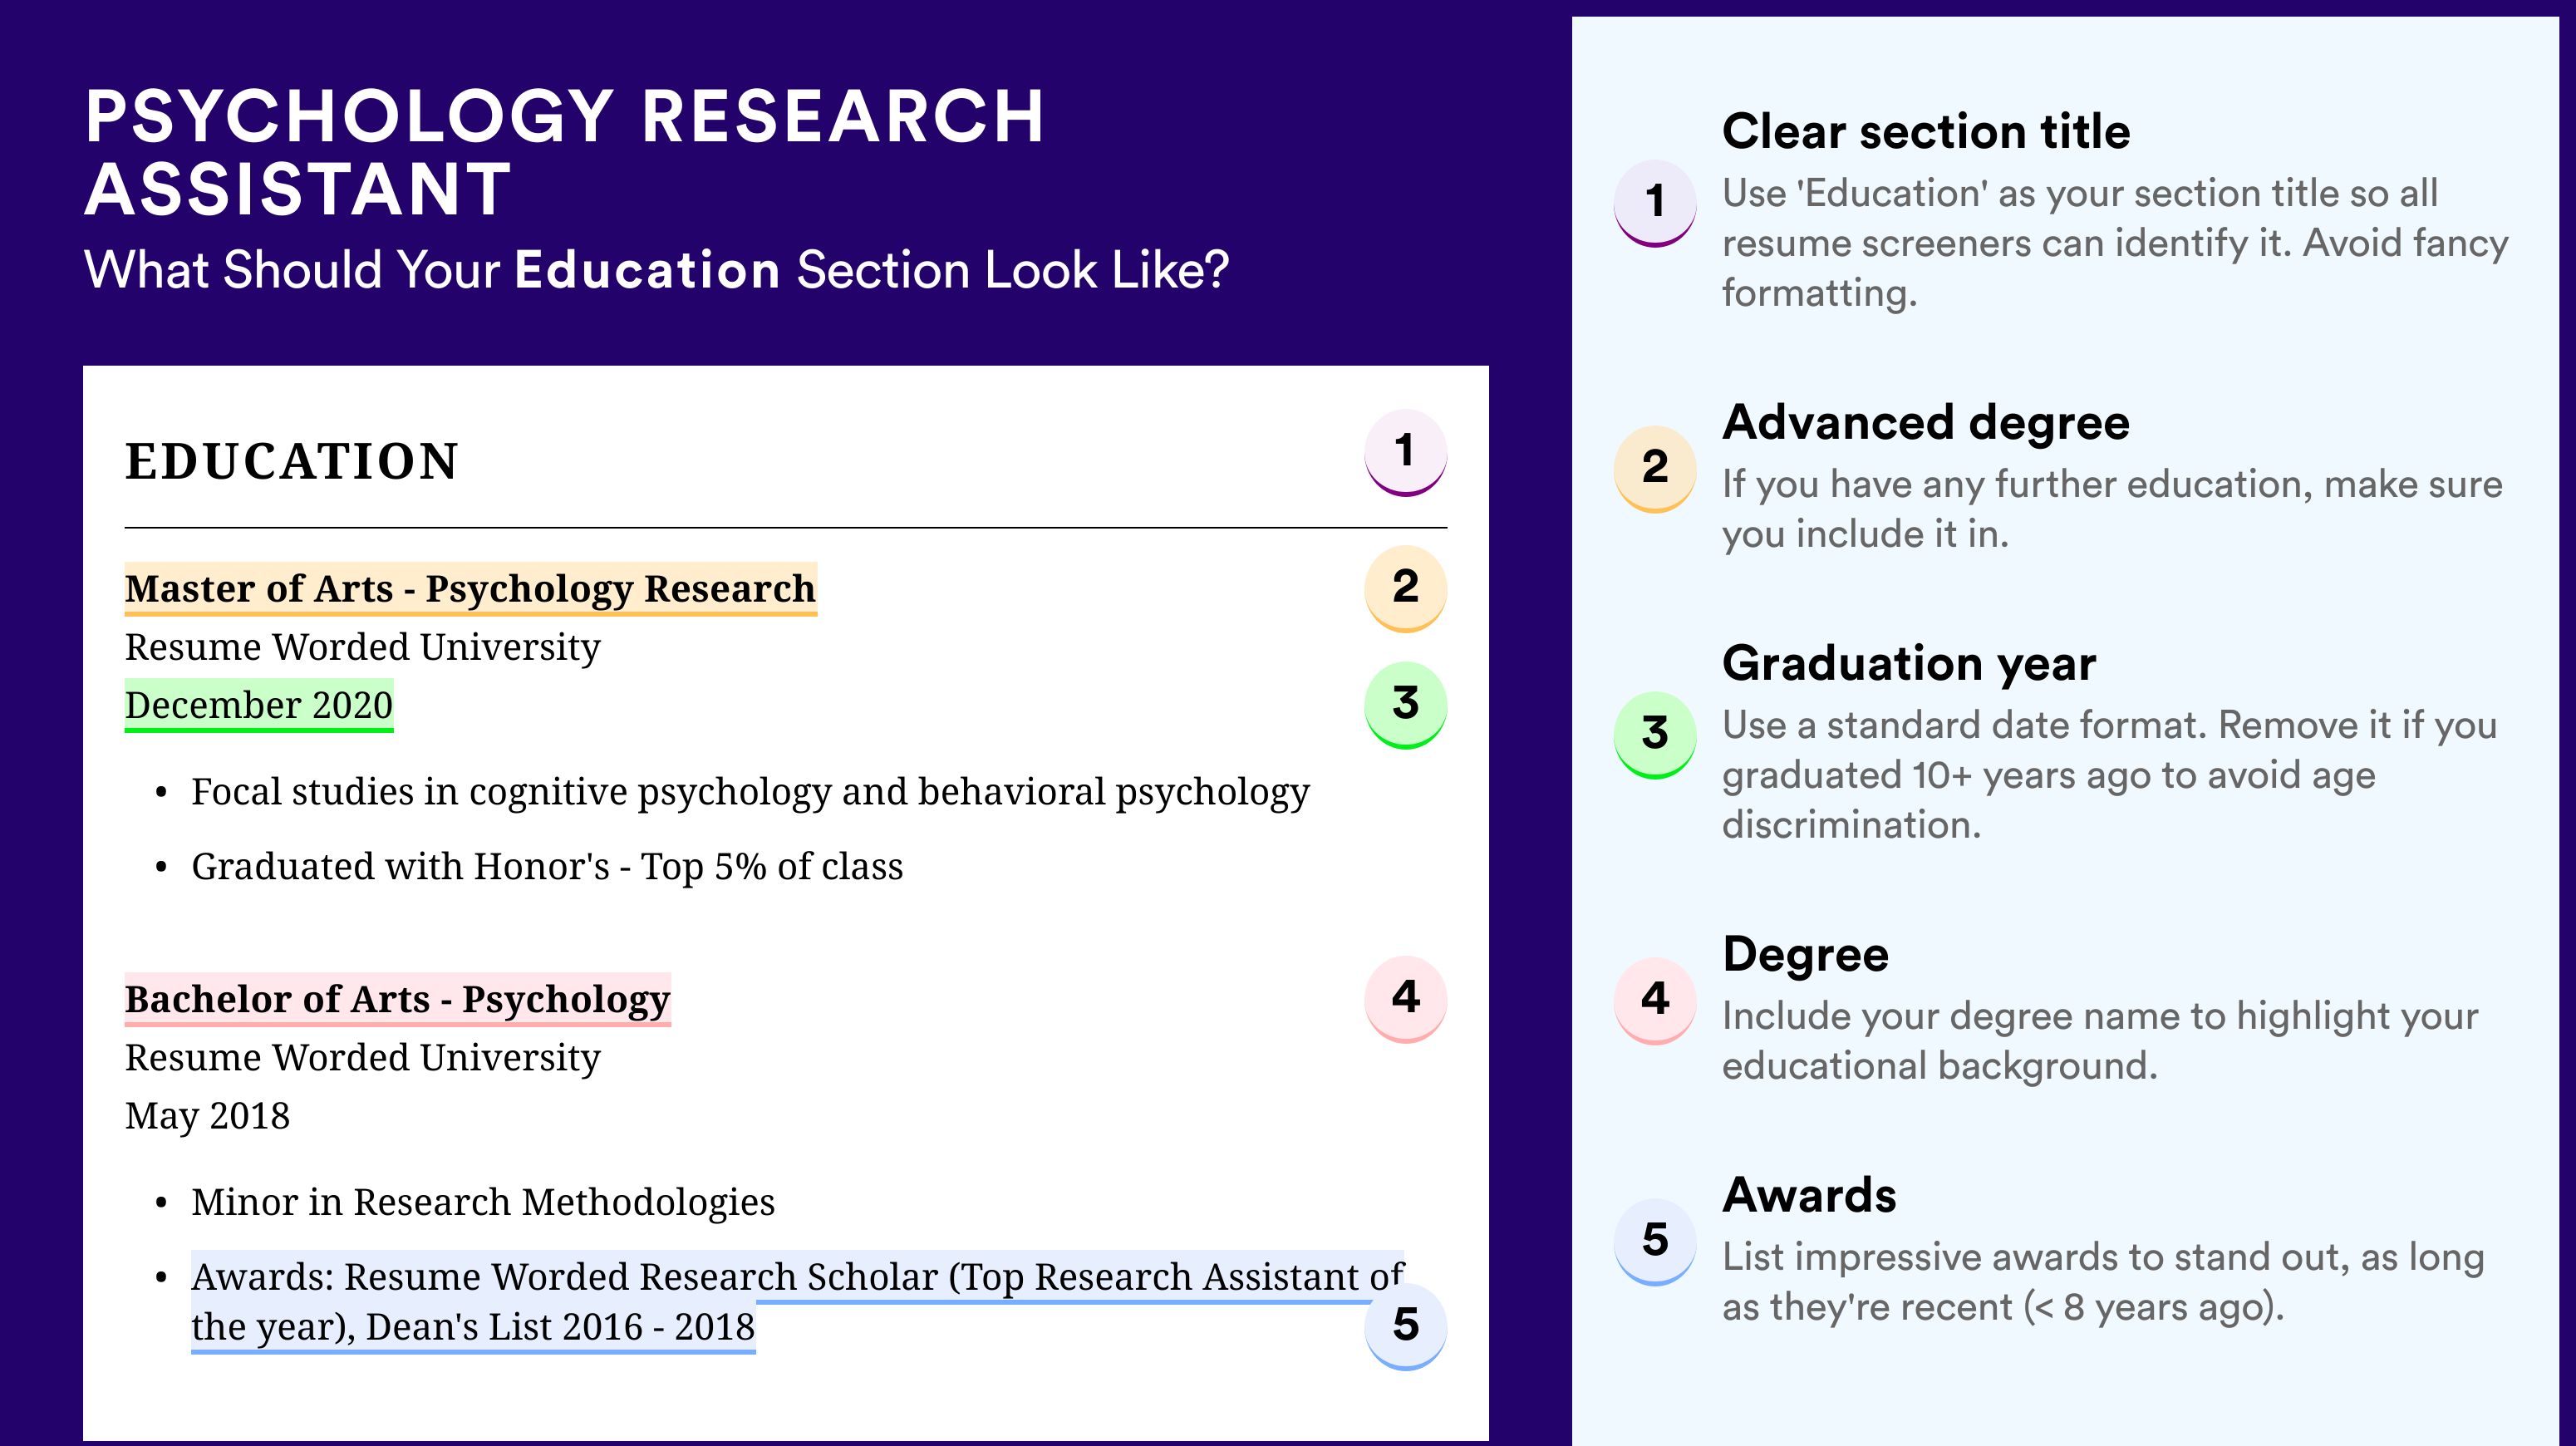 How To Write An Education Section - Psychology Research Assistant Roles